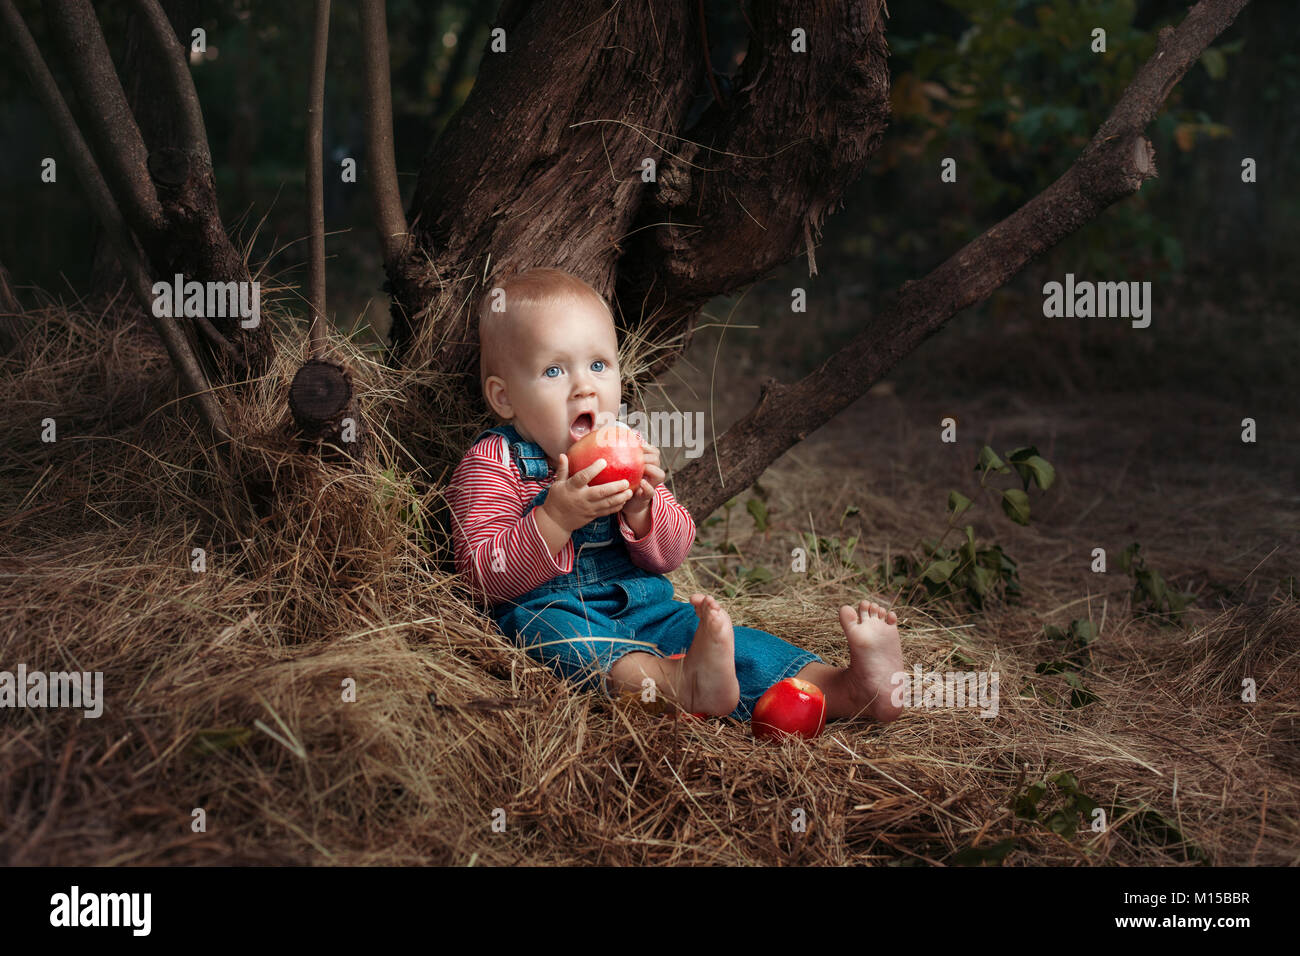 Little girl sitting under a tree and eats an apple. Stock Photo